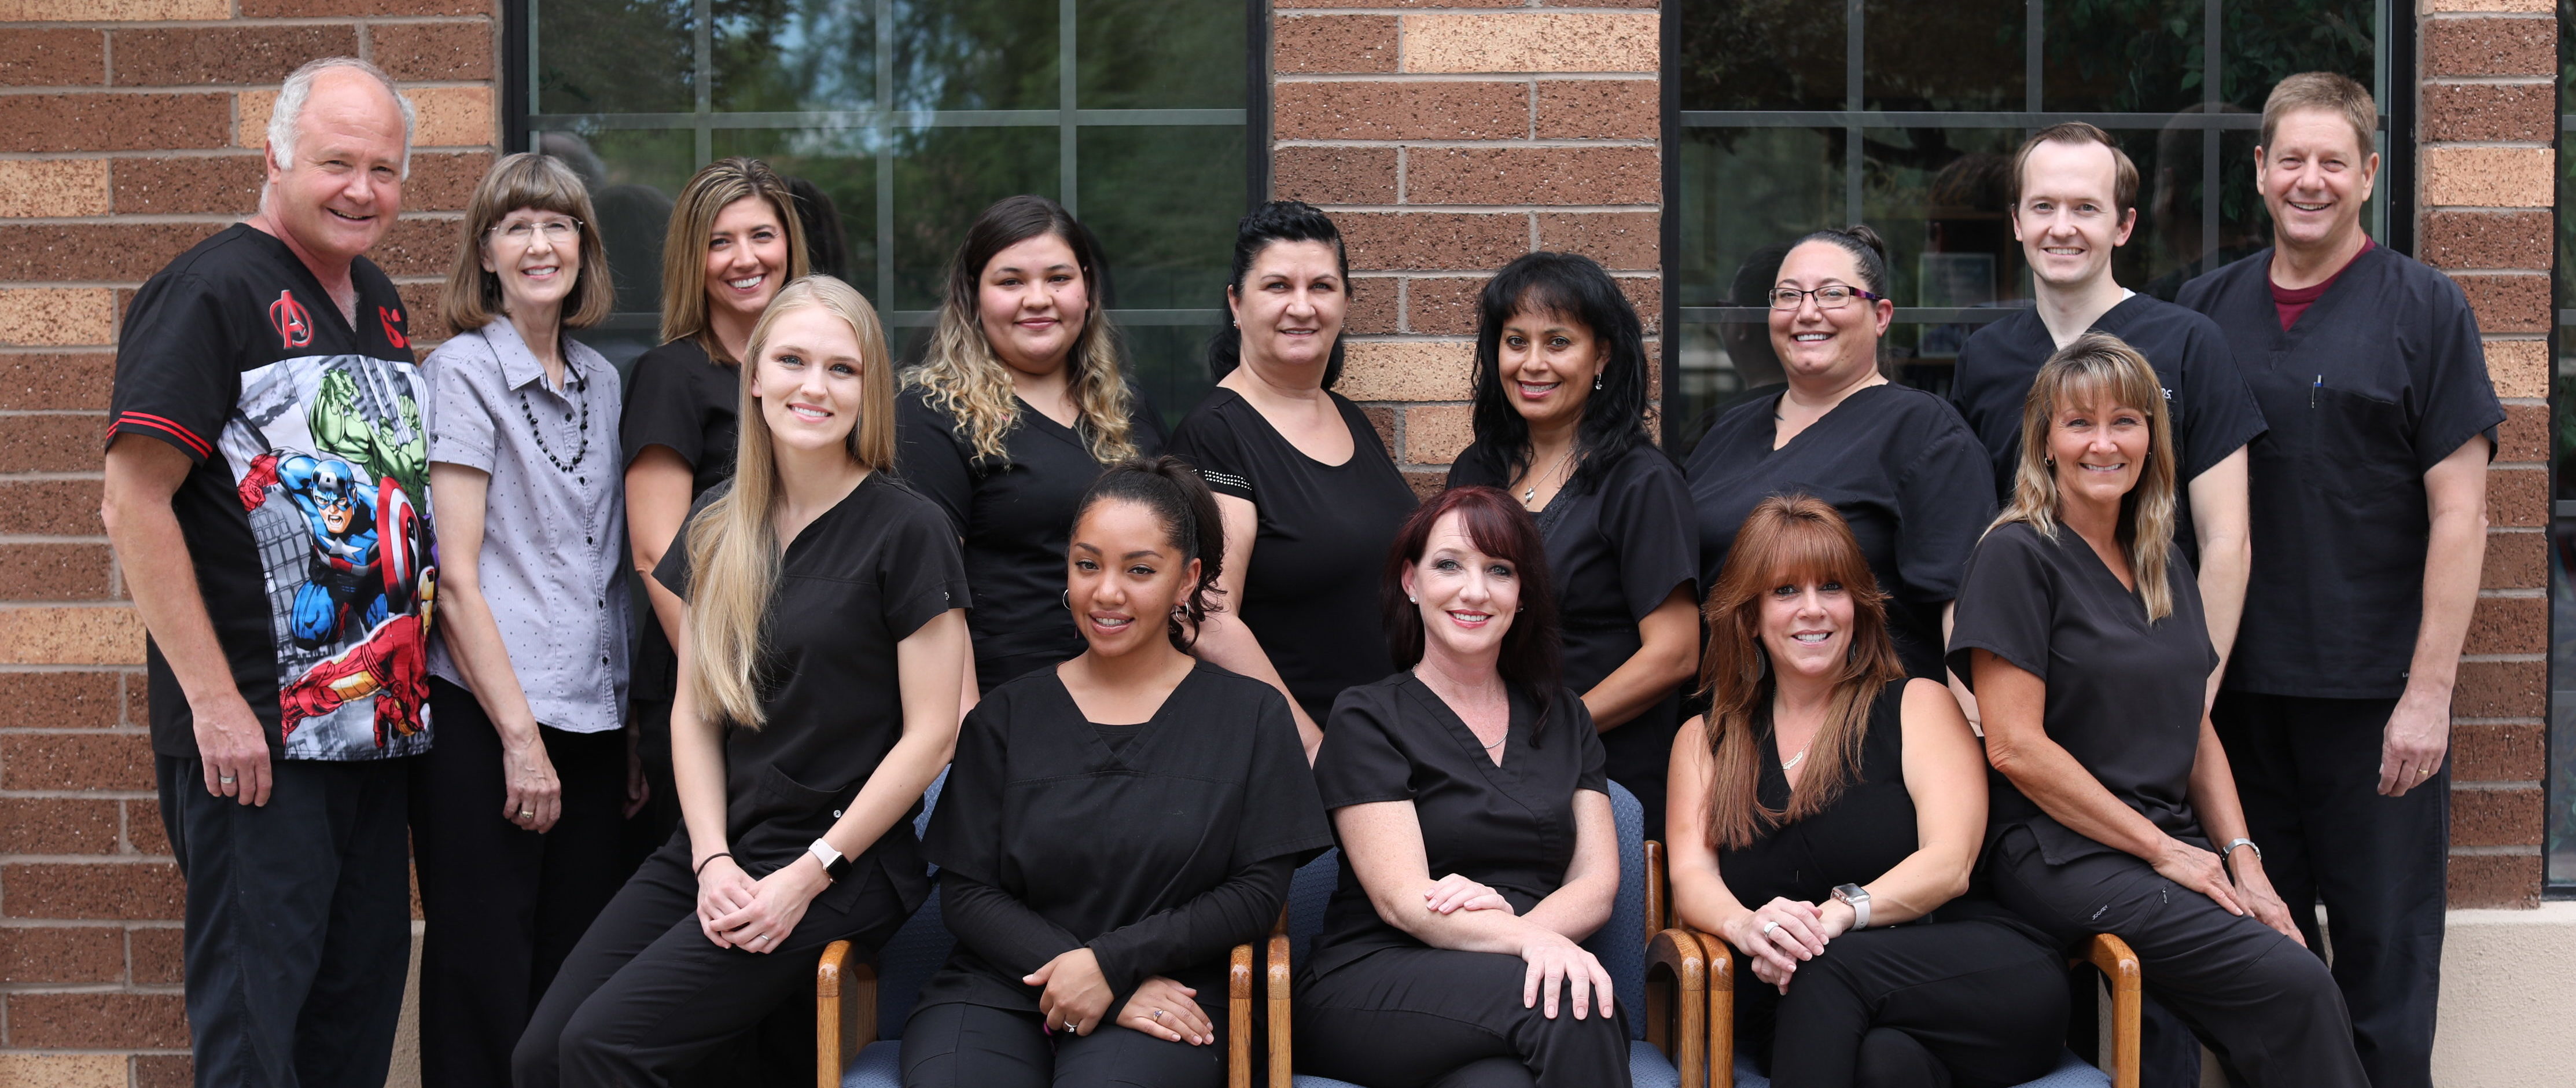 Group photo of Our Dental Team at Drs of Smiles in Mesa, AZ